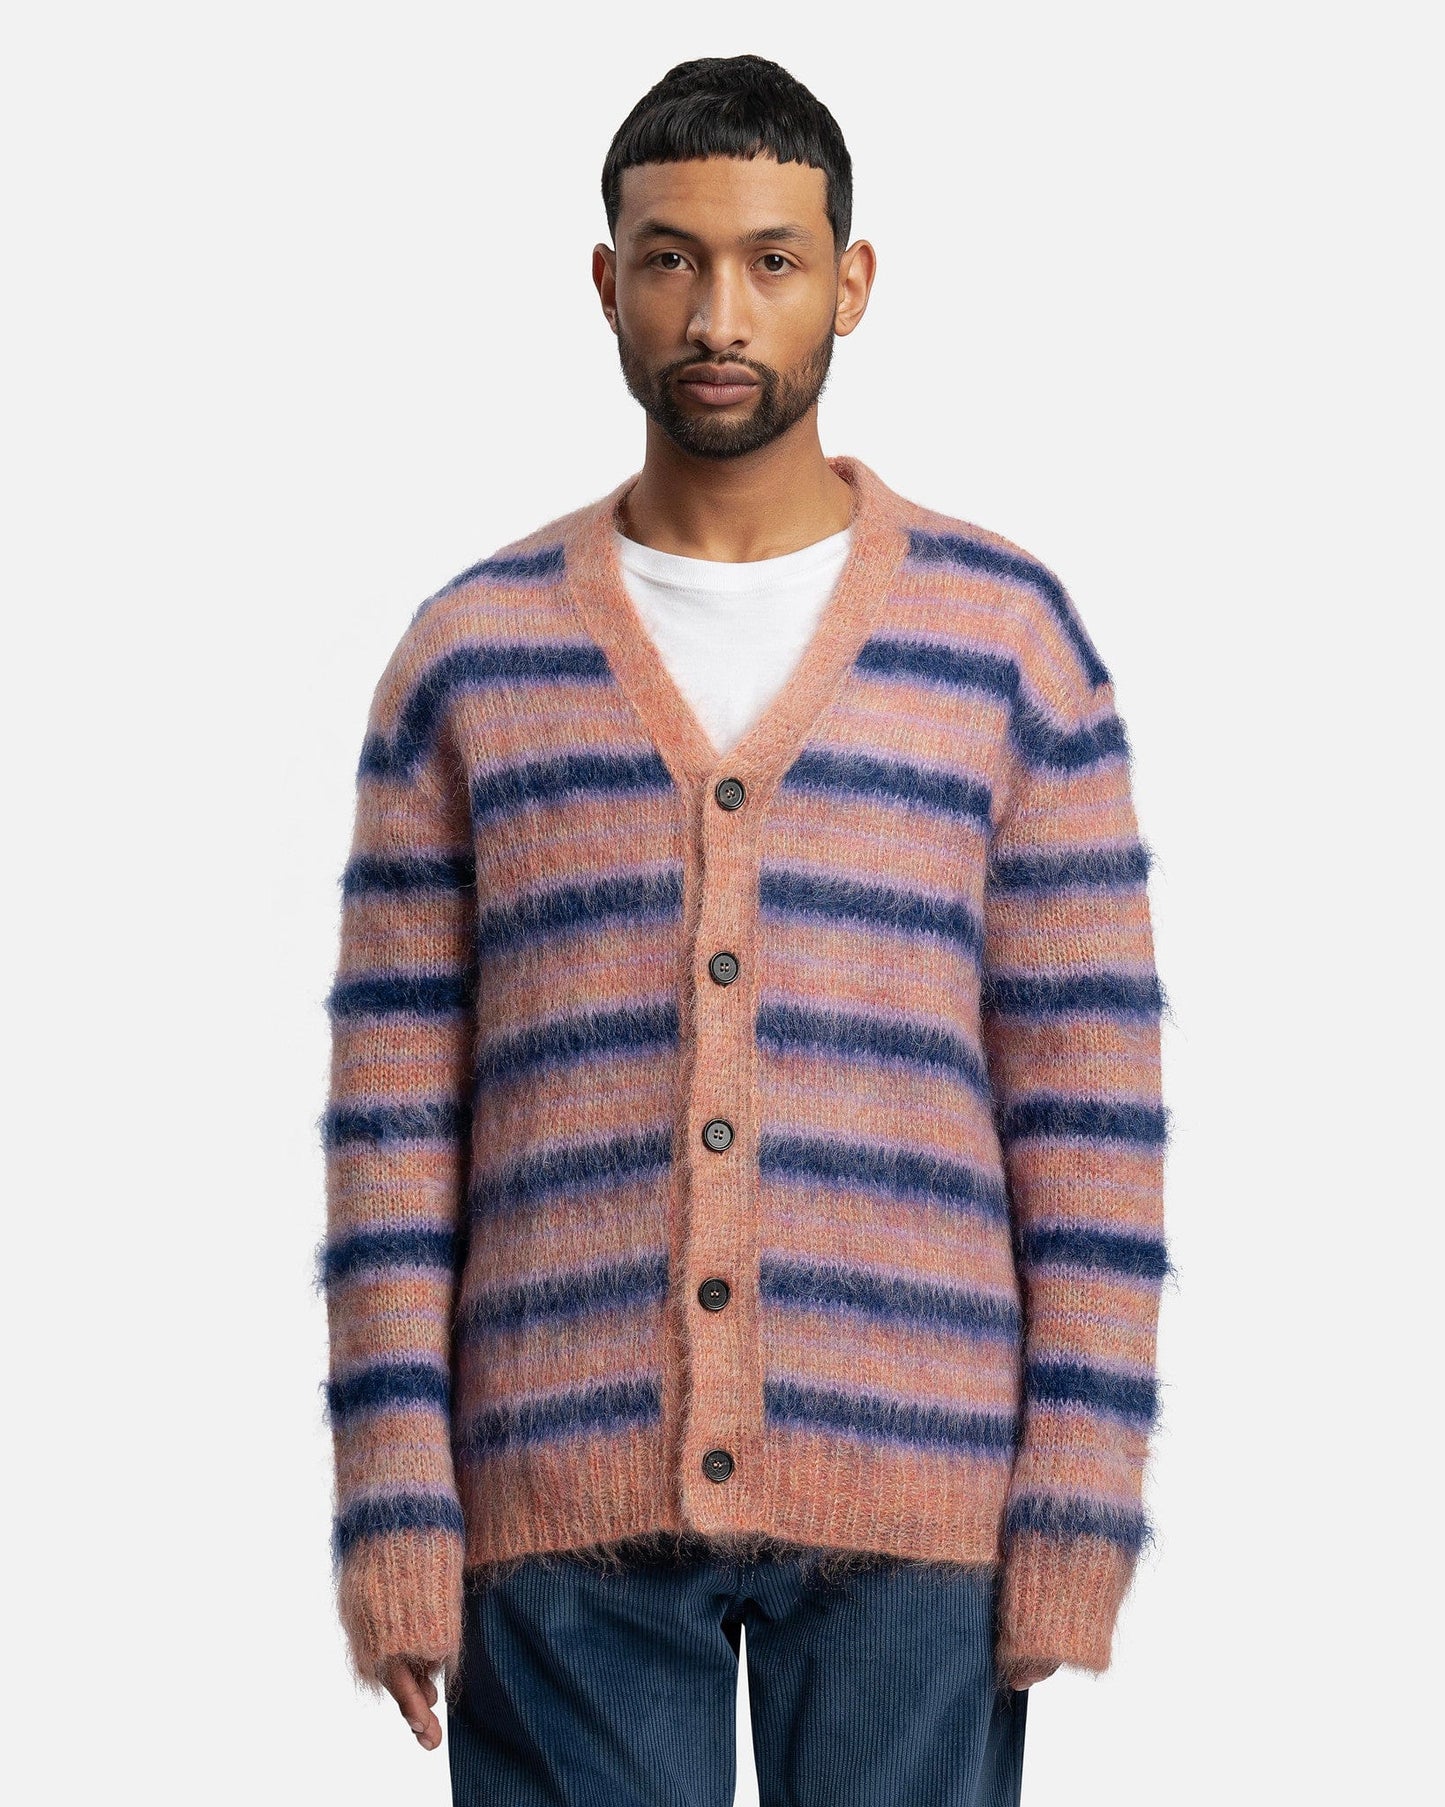 Marni Men's Sweater Iconic Brushed Striped Cardigan in Apricot